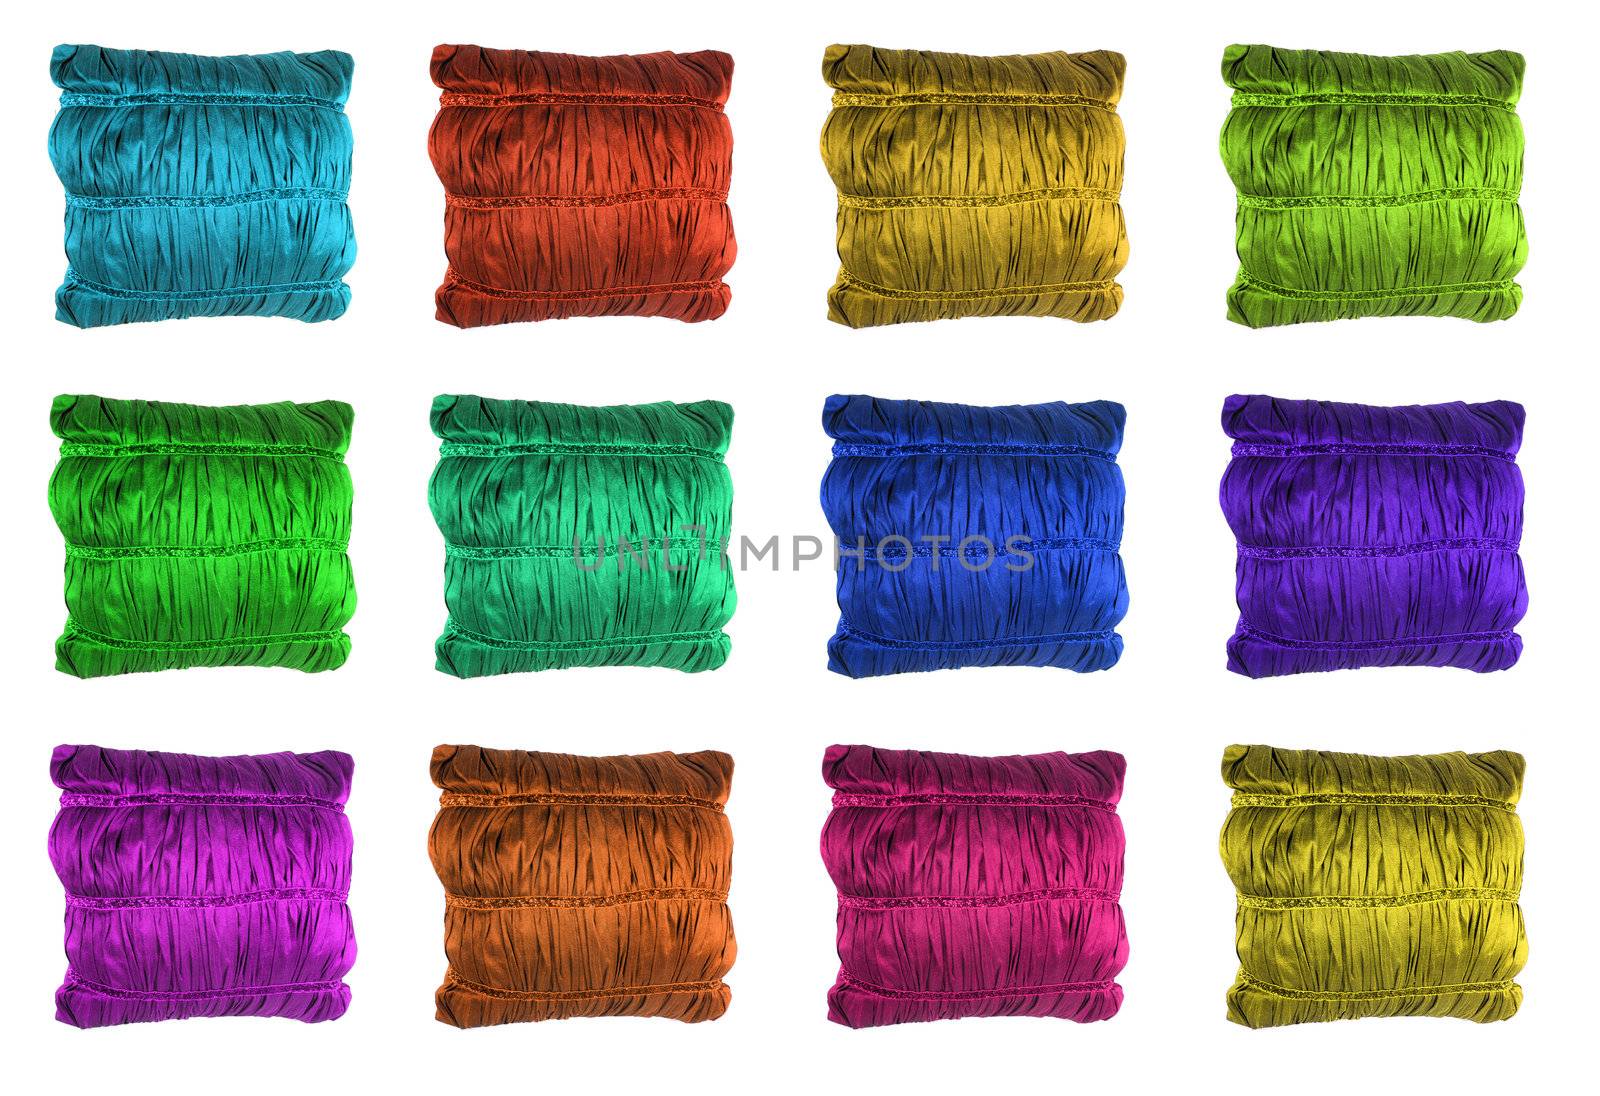 A set of colorful pillows which can also be used as web / website buttons, isolated on white background.